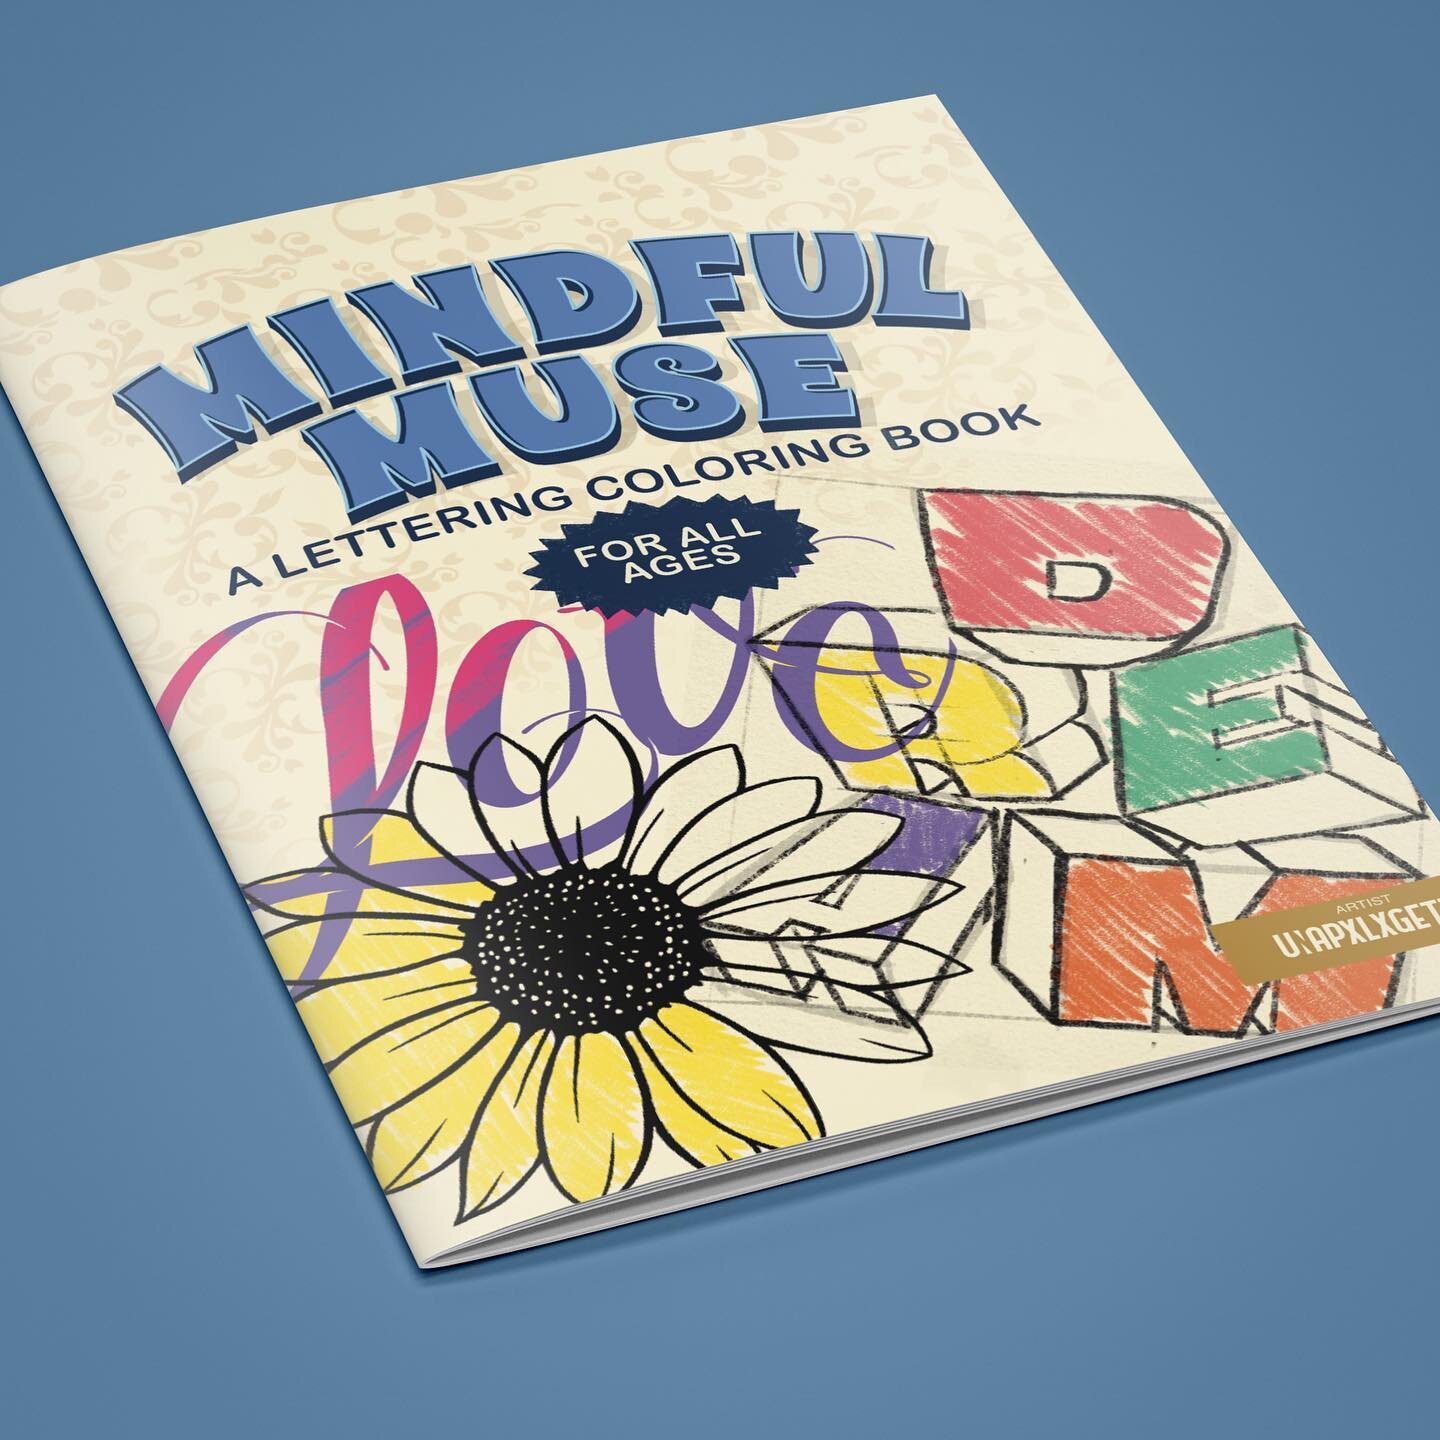 It&rsquo;s finally here!! my very first mindful lettering coloring book 📚🖍️ 

A compilation of past lettering projects that I&rsquo;ve done, carefully selected and now available to you in a coloring book format.

Why did I create Mindful Muse?

I s